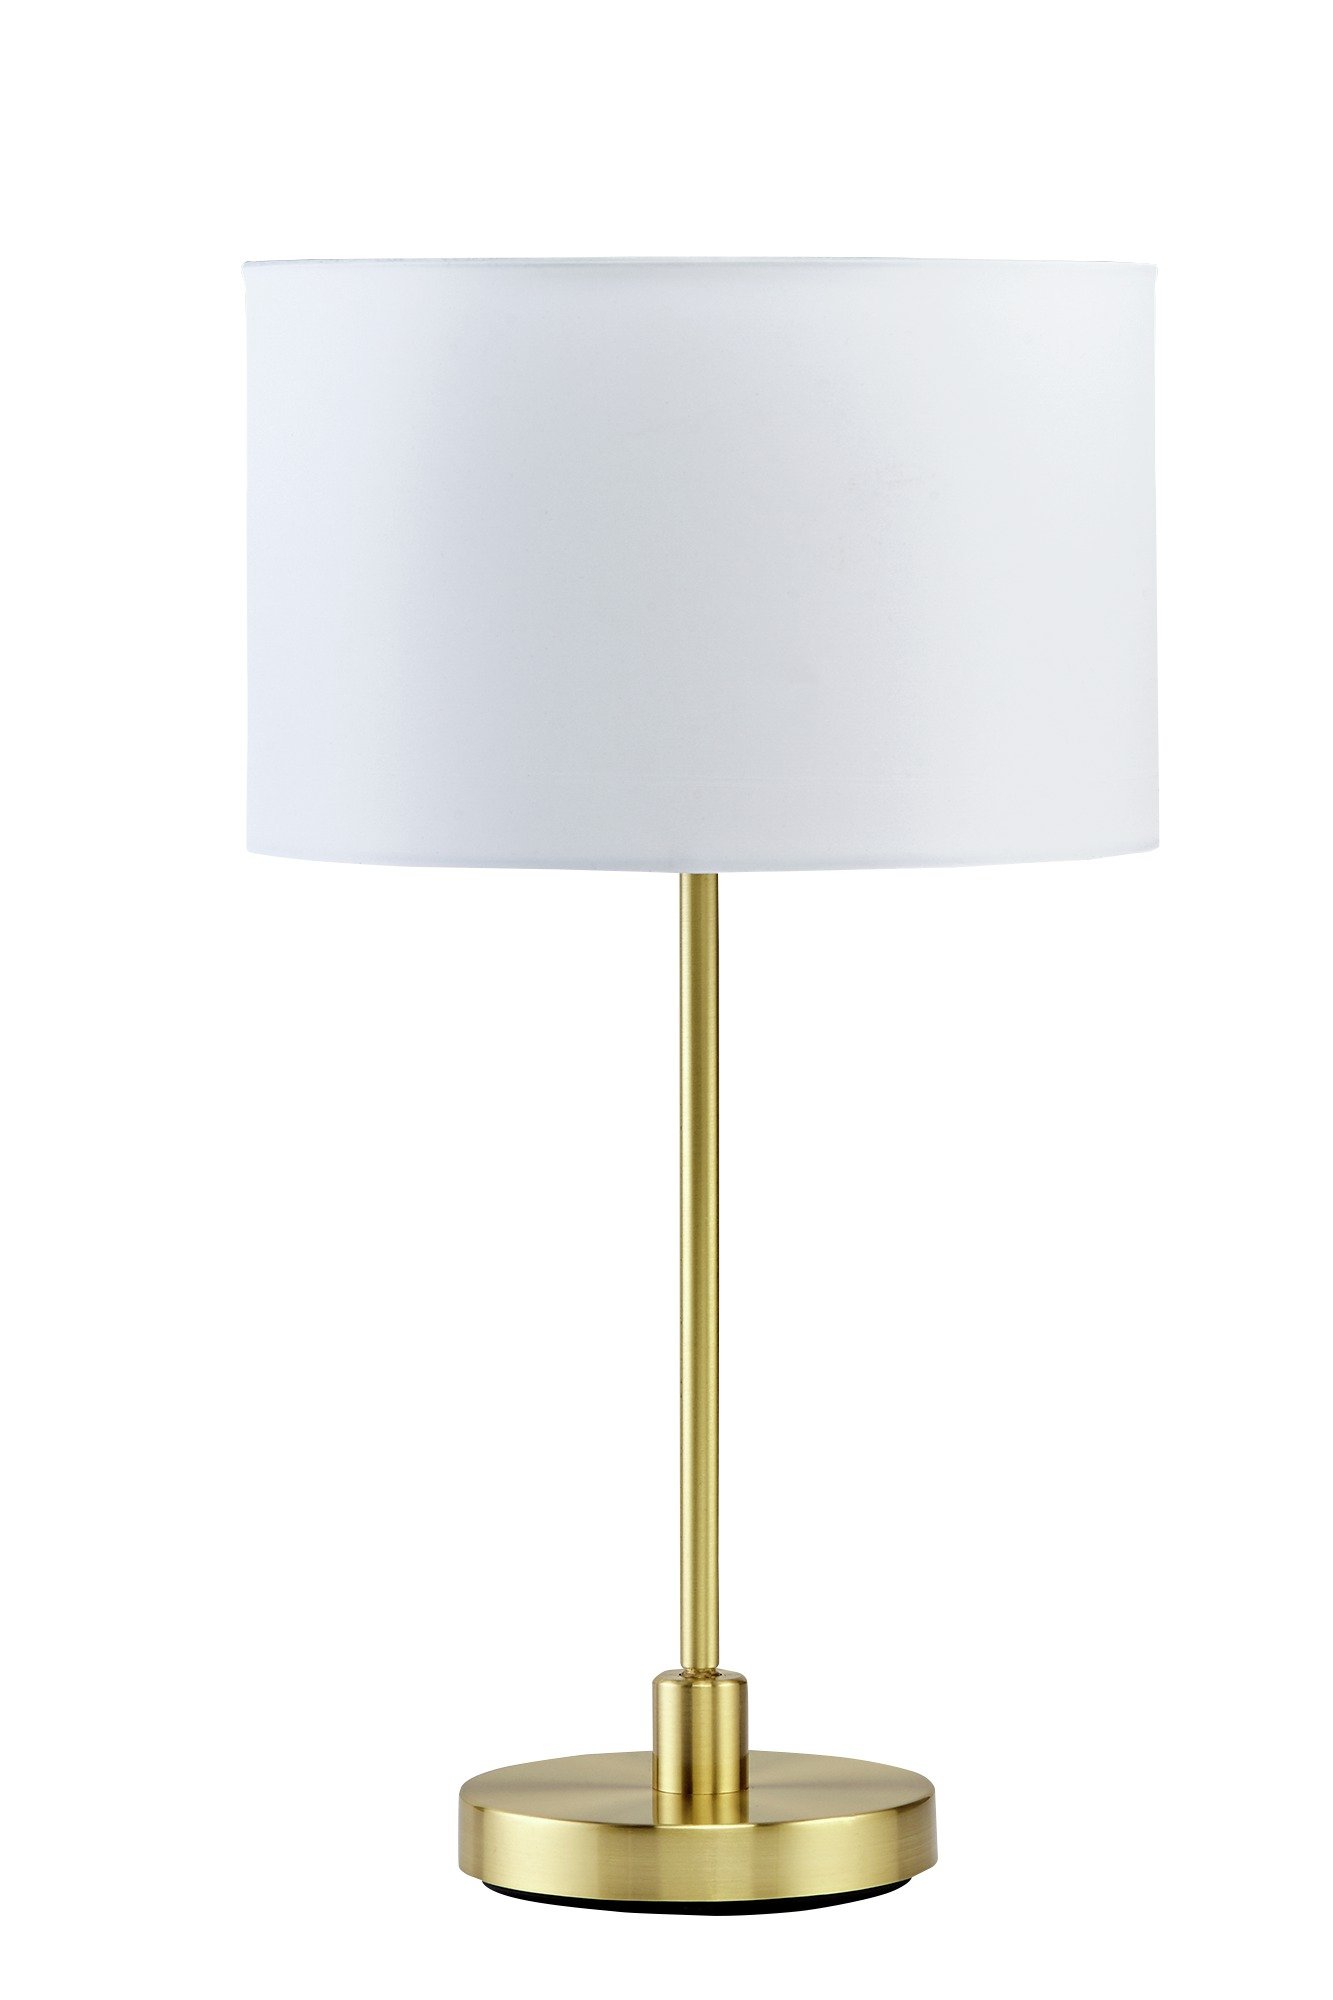 Heart of House Athena Brass Leaning Table Lamp